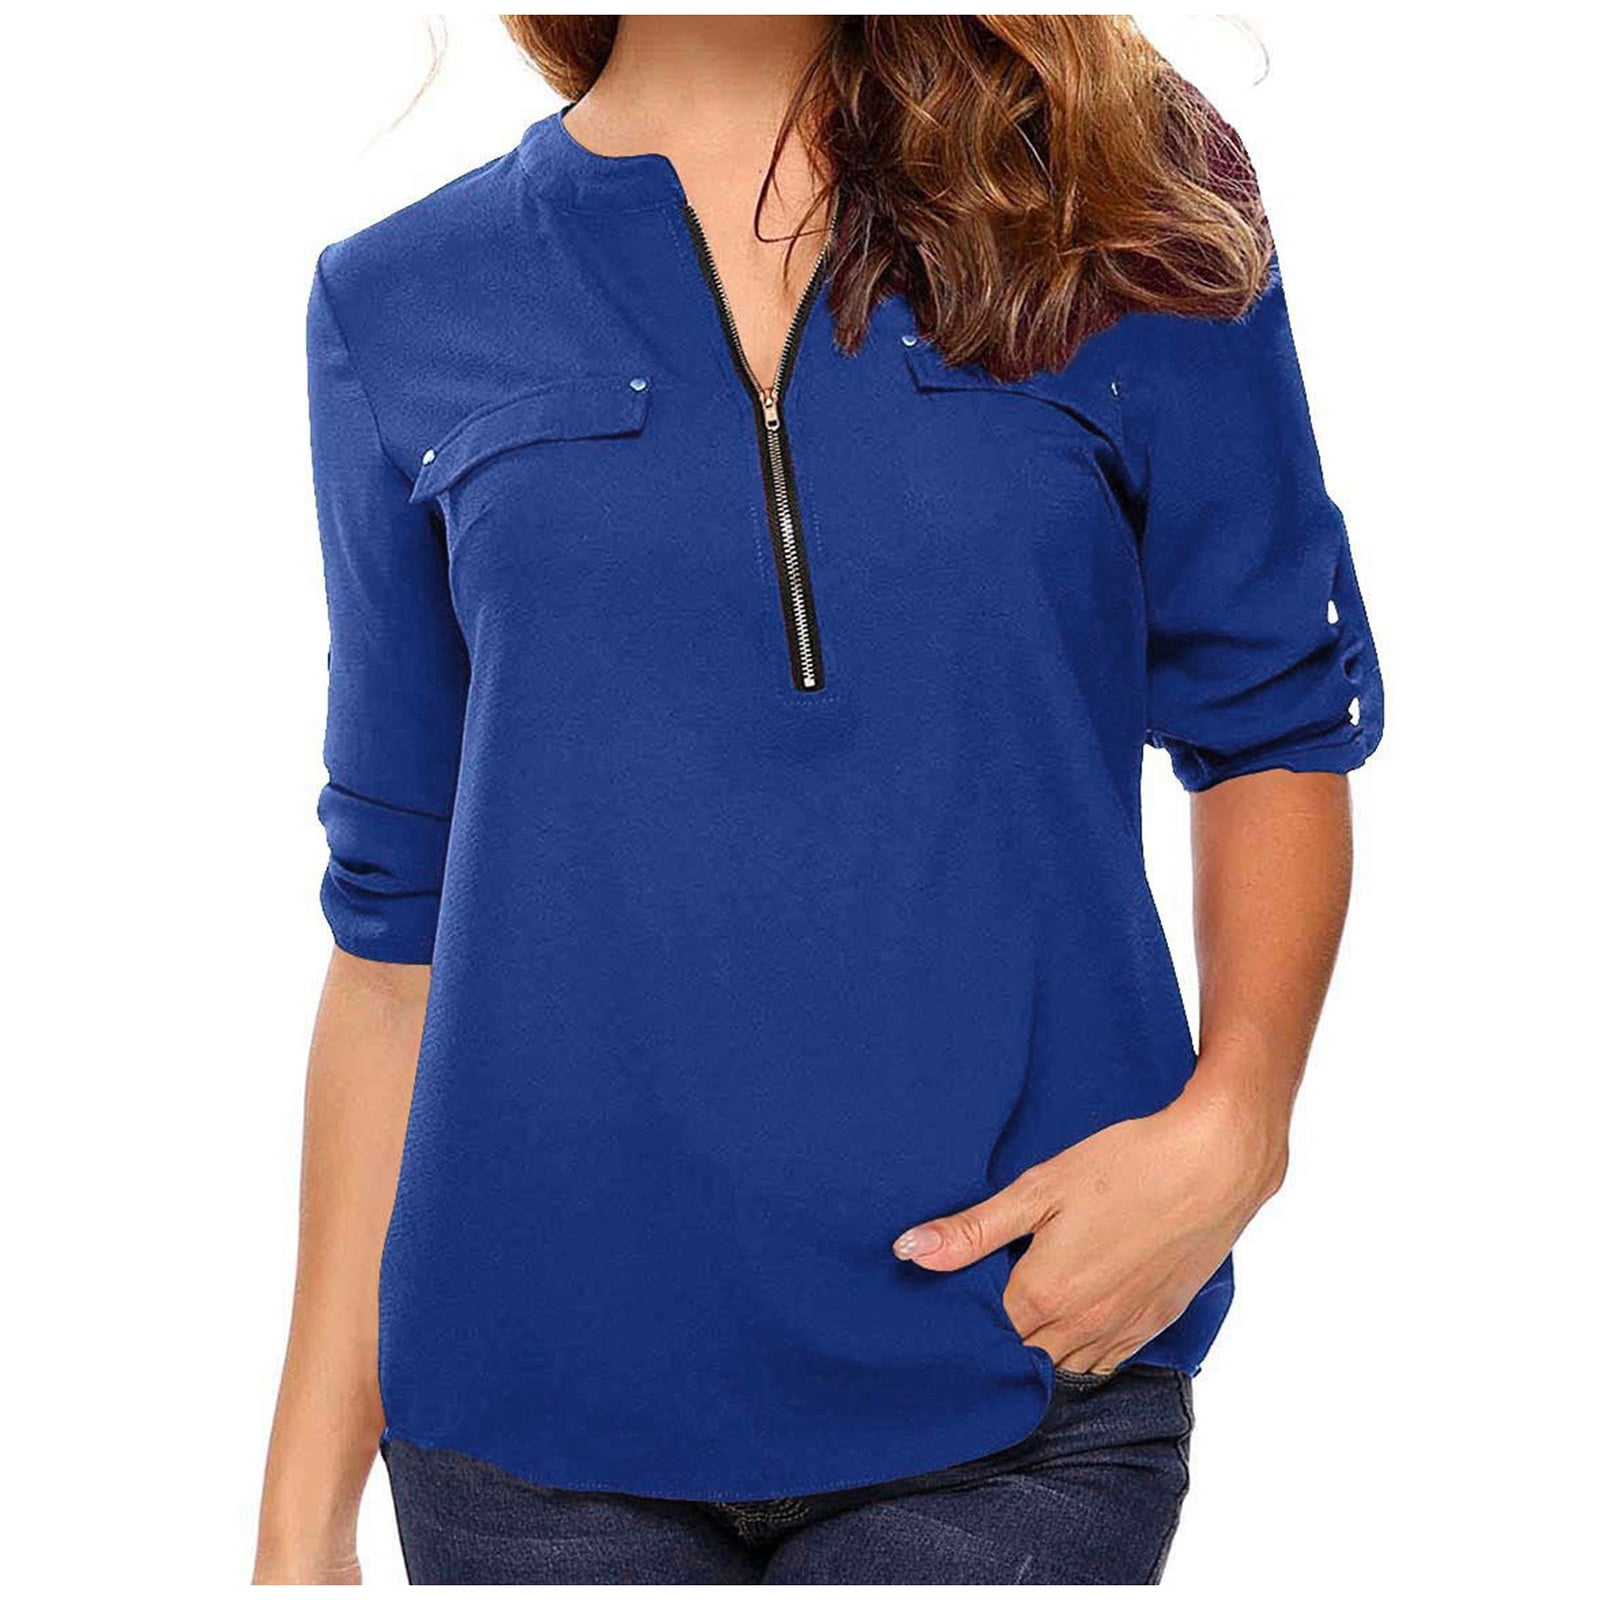 ZQGJB Women Casual Summer Tops Button Rolled-up Long Sleeve Zipper V Neck T  Shirts Plus Size Chiffon Elegant Blouse Loose Tunic Top with Pockets Blue